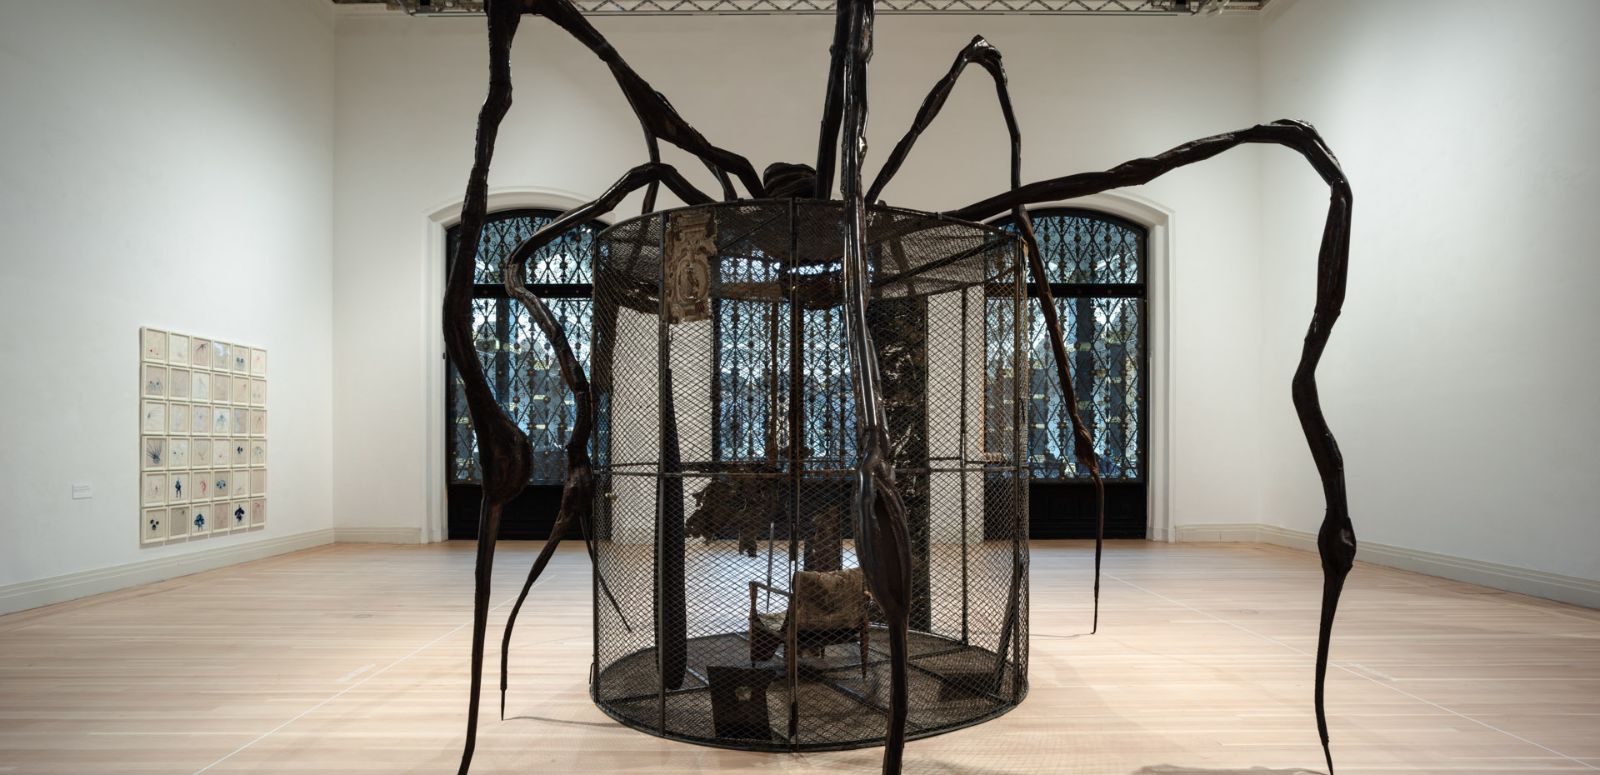 5 things to know about Louise Bourgeois: The Woven Child at